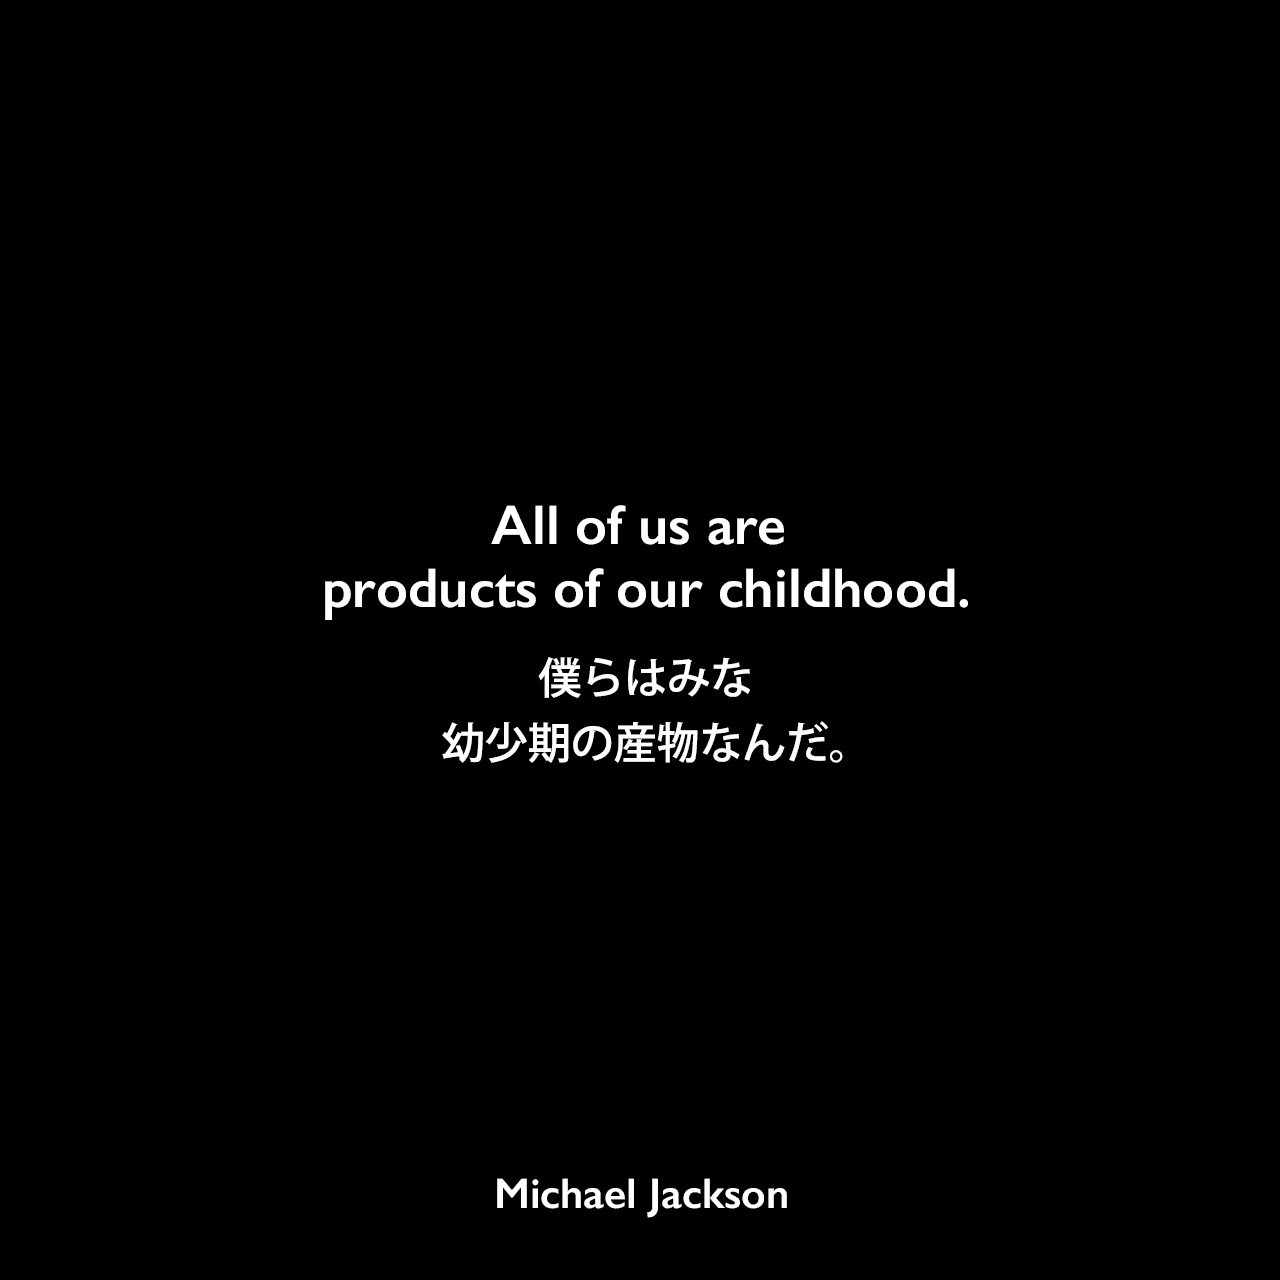 All of us are products of our childhood.僕らはみな幼少期の産物なんだ。Michael Jackson